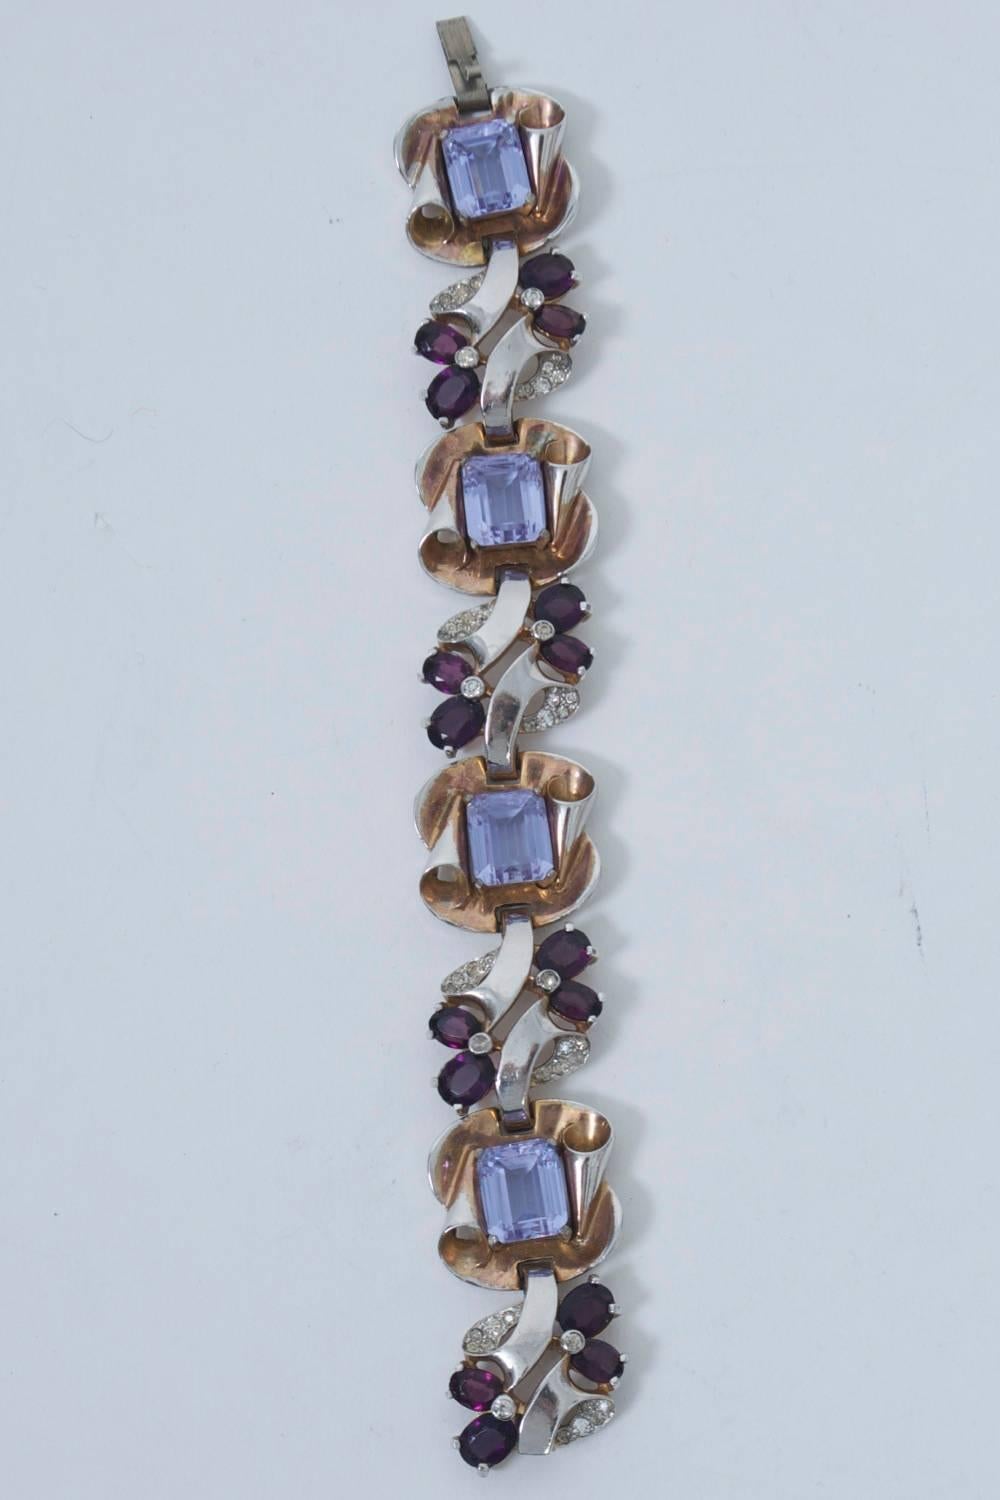 Retro bracelet by Mazer in gold tone and silver metal featuring lavender and purple stones accented by small rhinestones in a repeated link design.